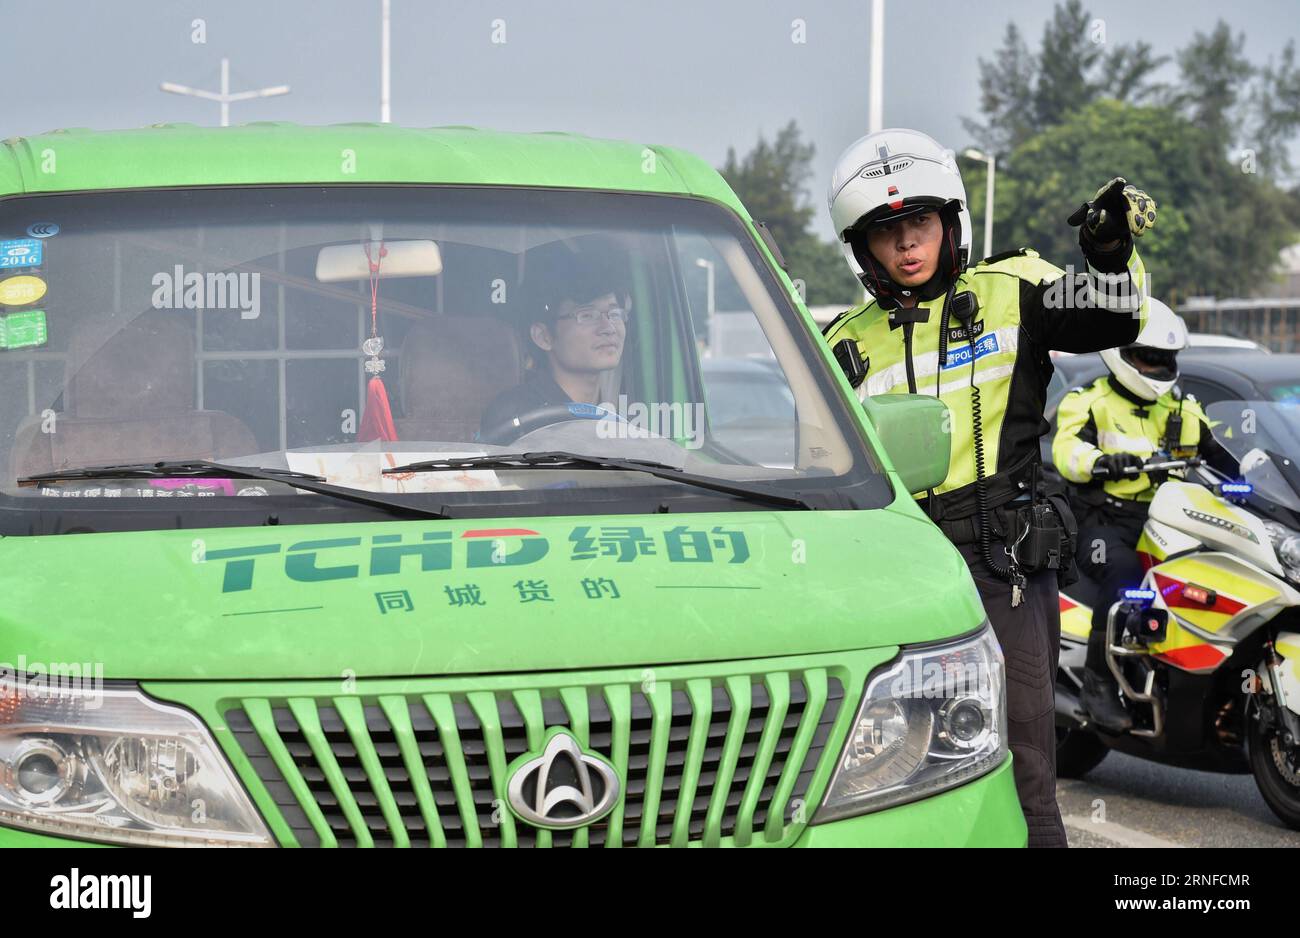 (160801) -- SHENZHEN , Aug. 1, 2016 -- A traffic policeman provides instructions to a driver at a high-occupancy vehicle lane (HOV lane) in Shenzhen, south China s Guangdong Province, Aug. 1, 2016. Shenzhen s first HOV lane was put into use on Monday to increase average vehicle occupancy with the goal of reducing traffic congestion and air pollution. ) (wyl) CHINA-SHENZHEN-TRAFFIC-HOV LANE (CN) MaoxSiqian PUBLICATIONxNOTxINxCHN   160801 Shenzhen Aug 1 2016 a Traffic Policeman provides Instructions to a Driver AT a High occupancy Vehicle Lane Hov Lane in Shenzhen South China S Guangdong Provinc Stock Photo